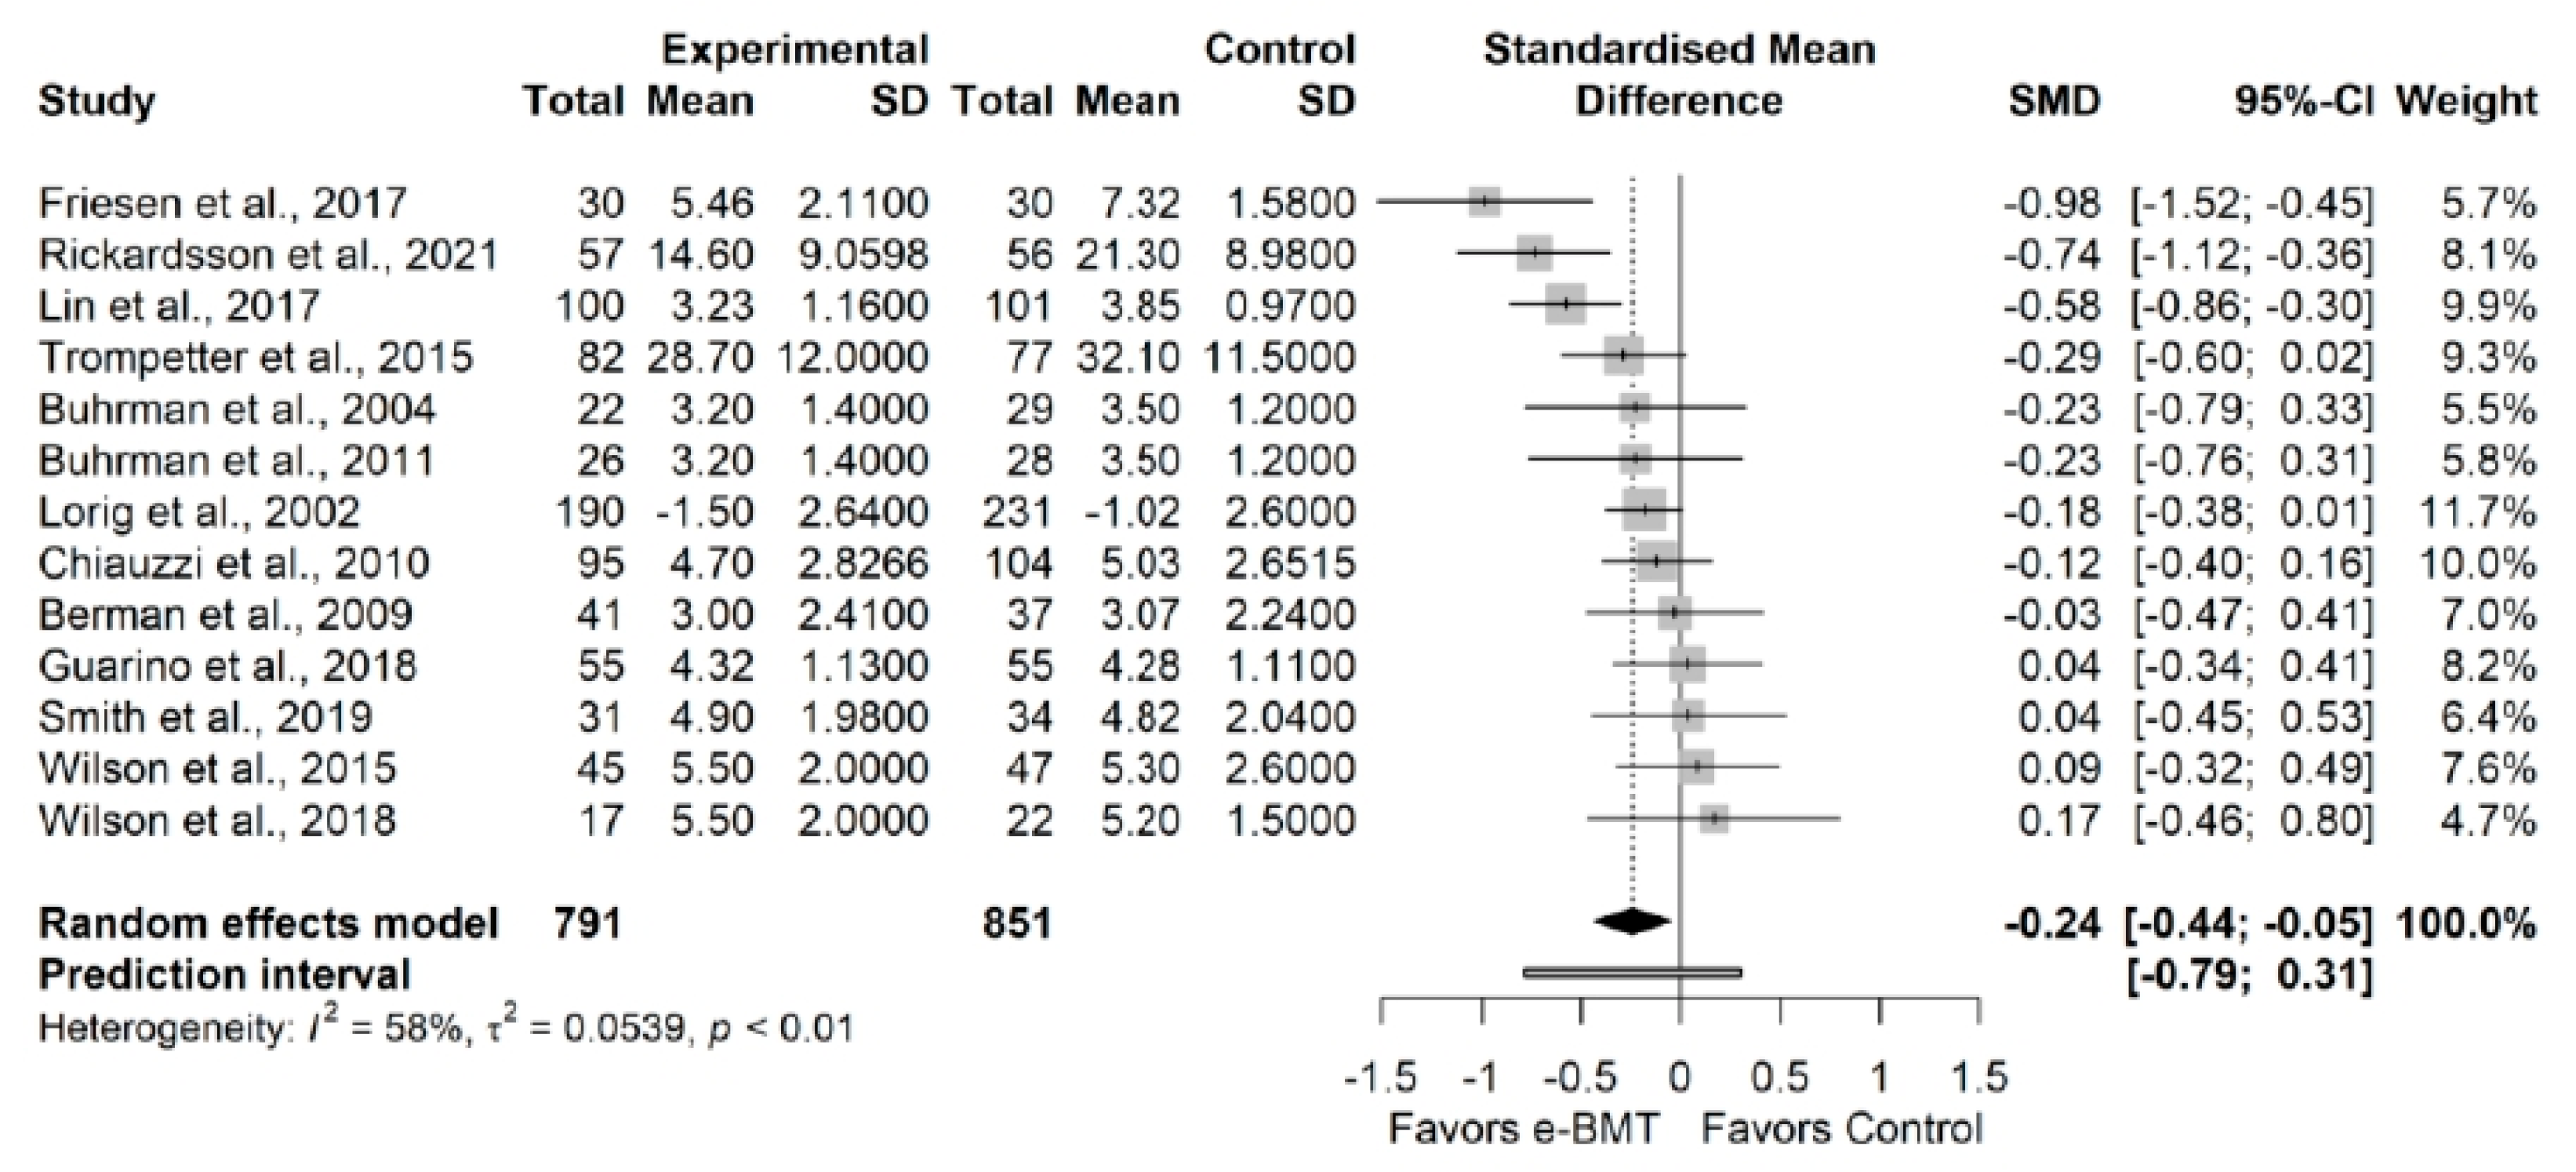 JCM | Free Full-Text | Implementation of Online Behavior Modification  Techniques in the Management of Chronic Musculoskeletal Pain: A Systematic  Review and Meta-Analysis | HTML